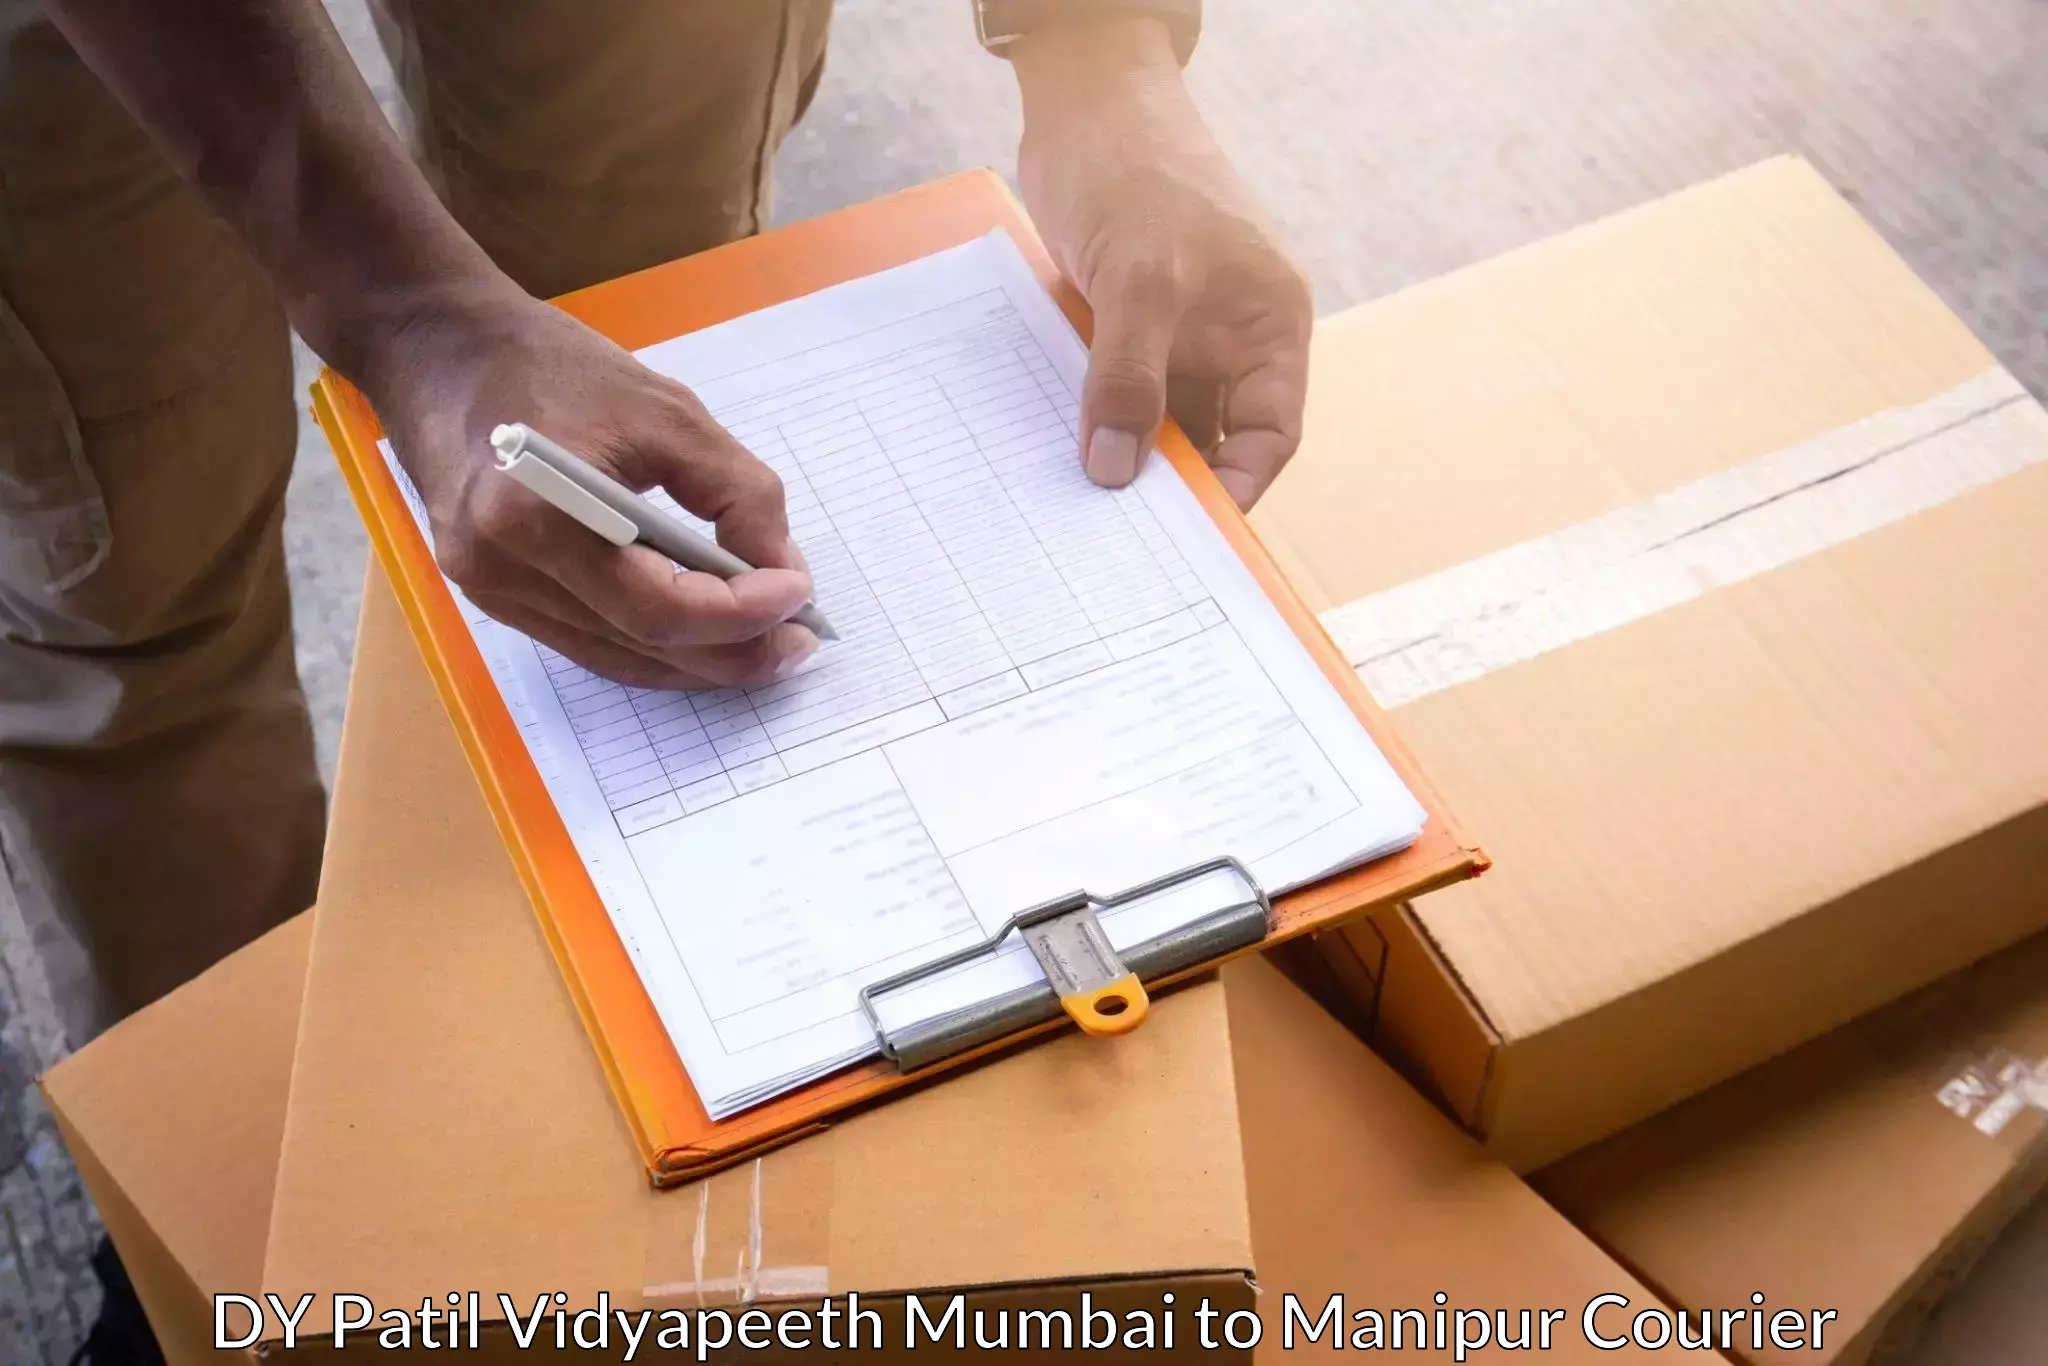 Local courier options DY Patil Vidyapeeth Mumbai to Manipur